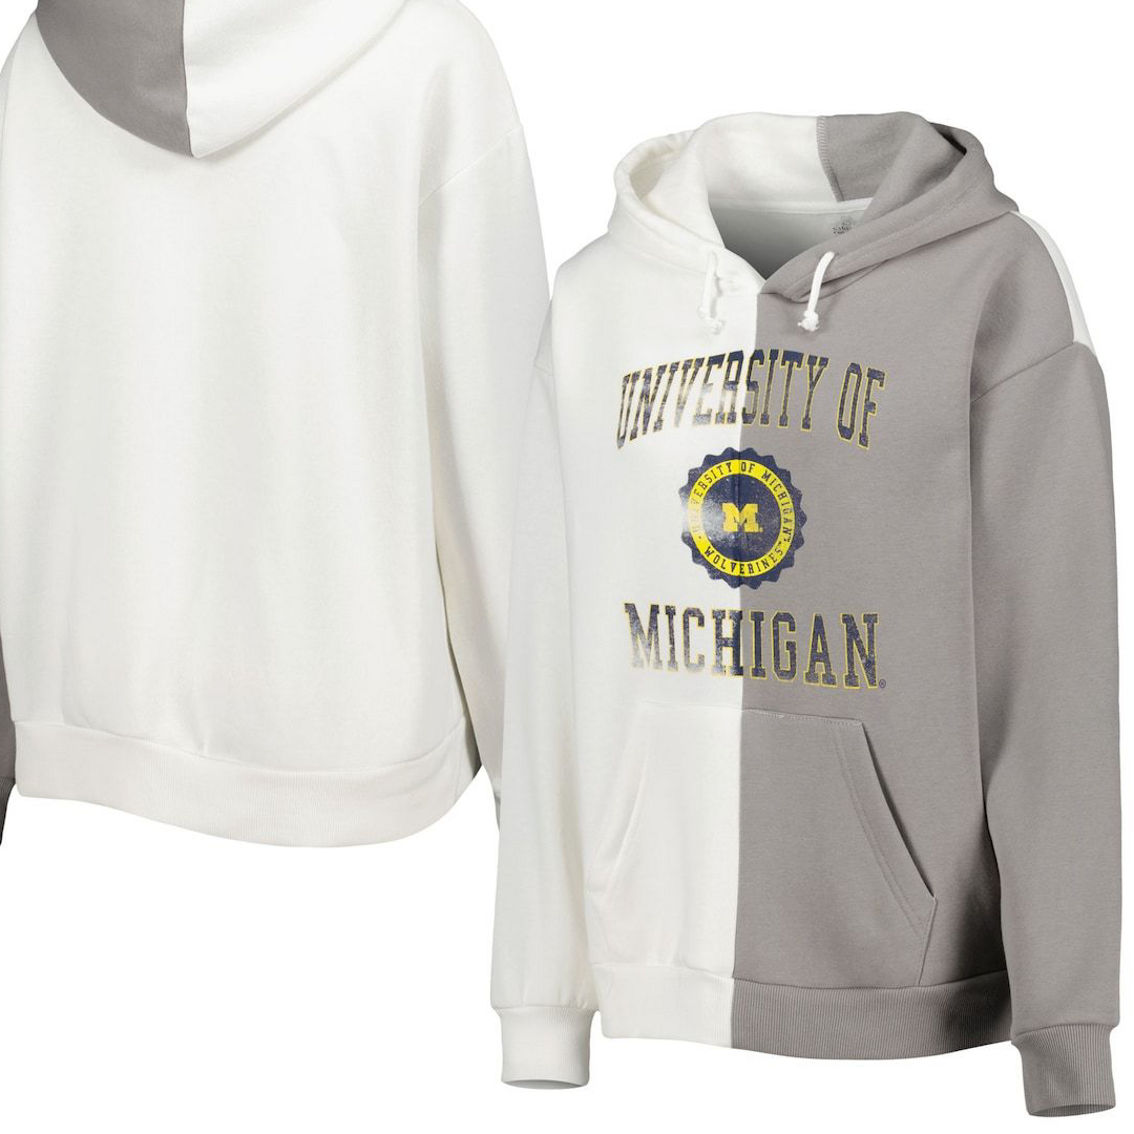 Gameday Couture Women's Gray/White Michigan Wolverines Split Pullover Hoodie - Image 2 of 4